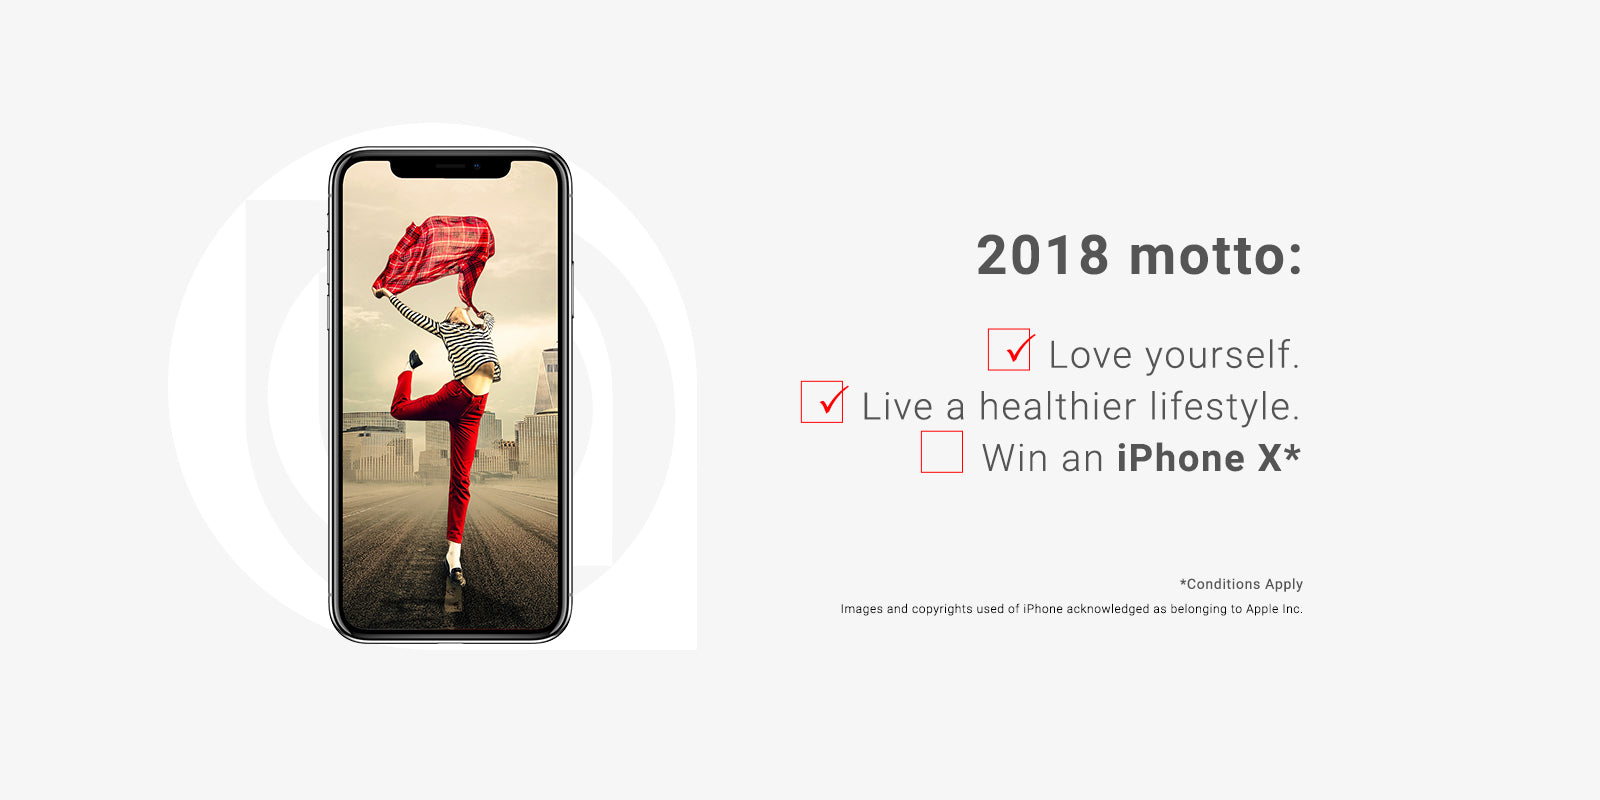 #Loveyourself Goals Could Win You An iPhone X This Valentine’s Day